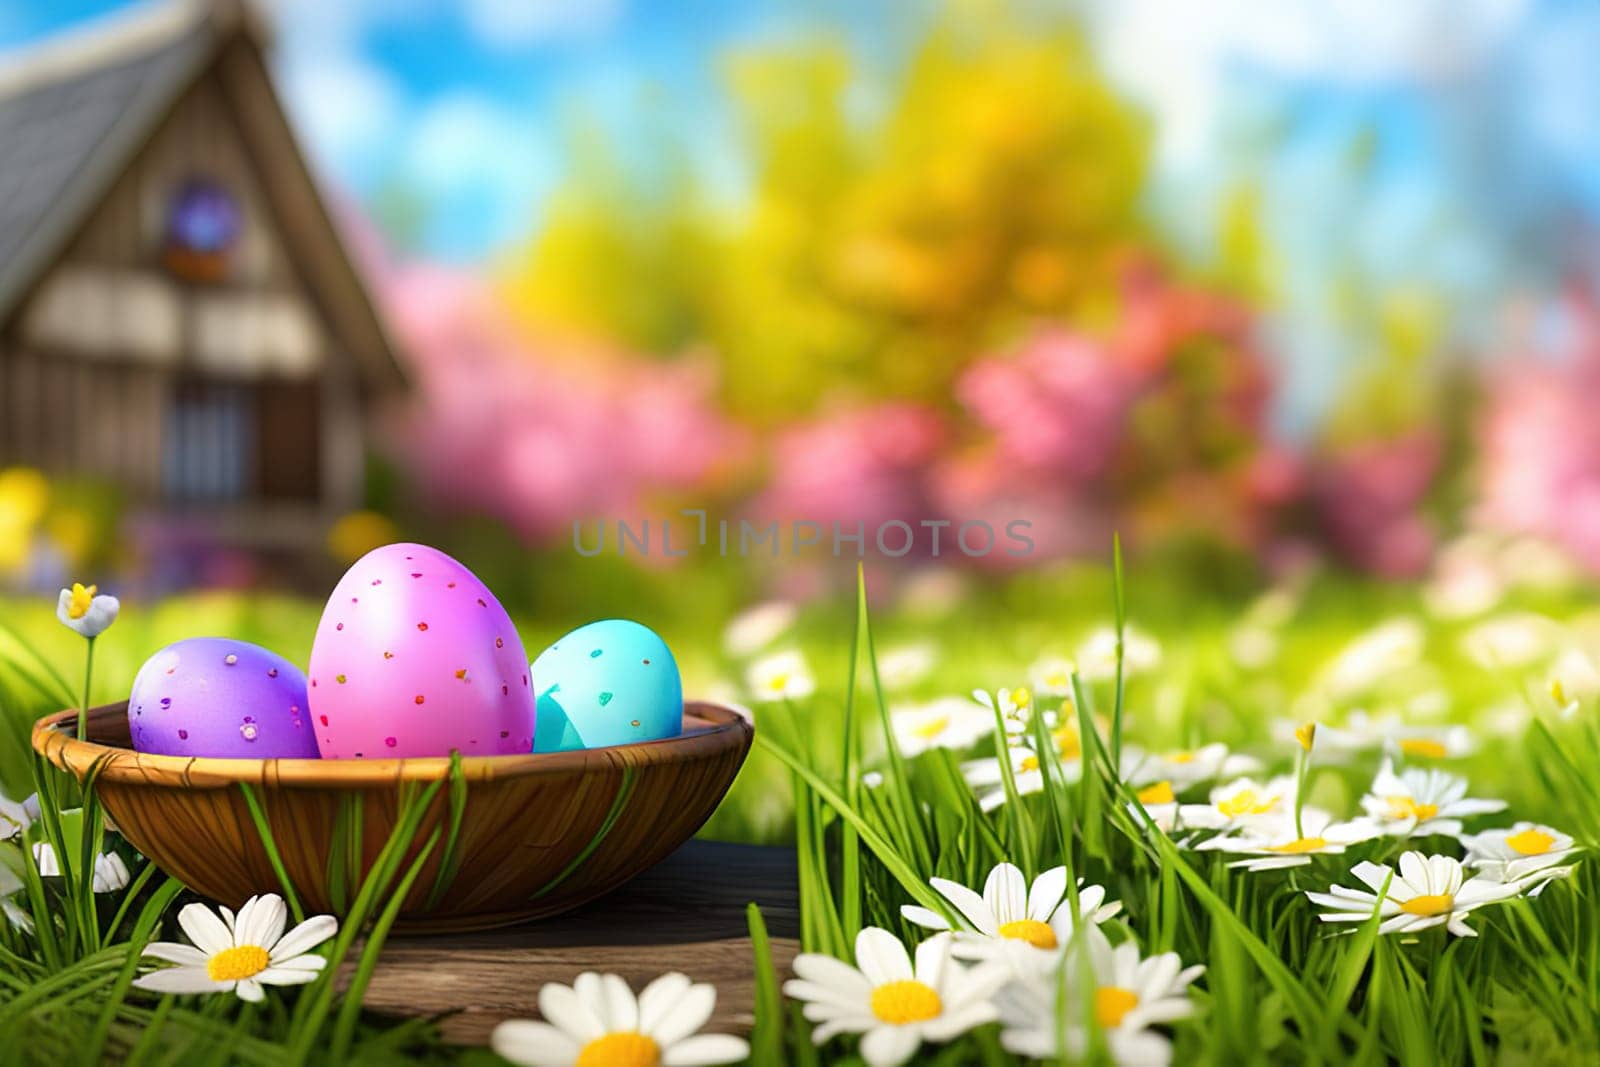 Basket of easter eggs on green grass with flowers at sunny day.